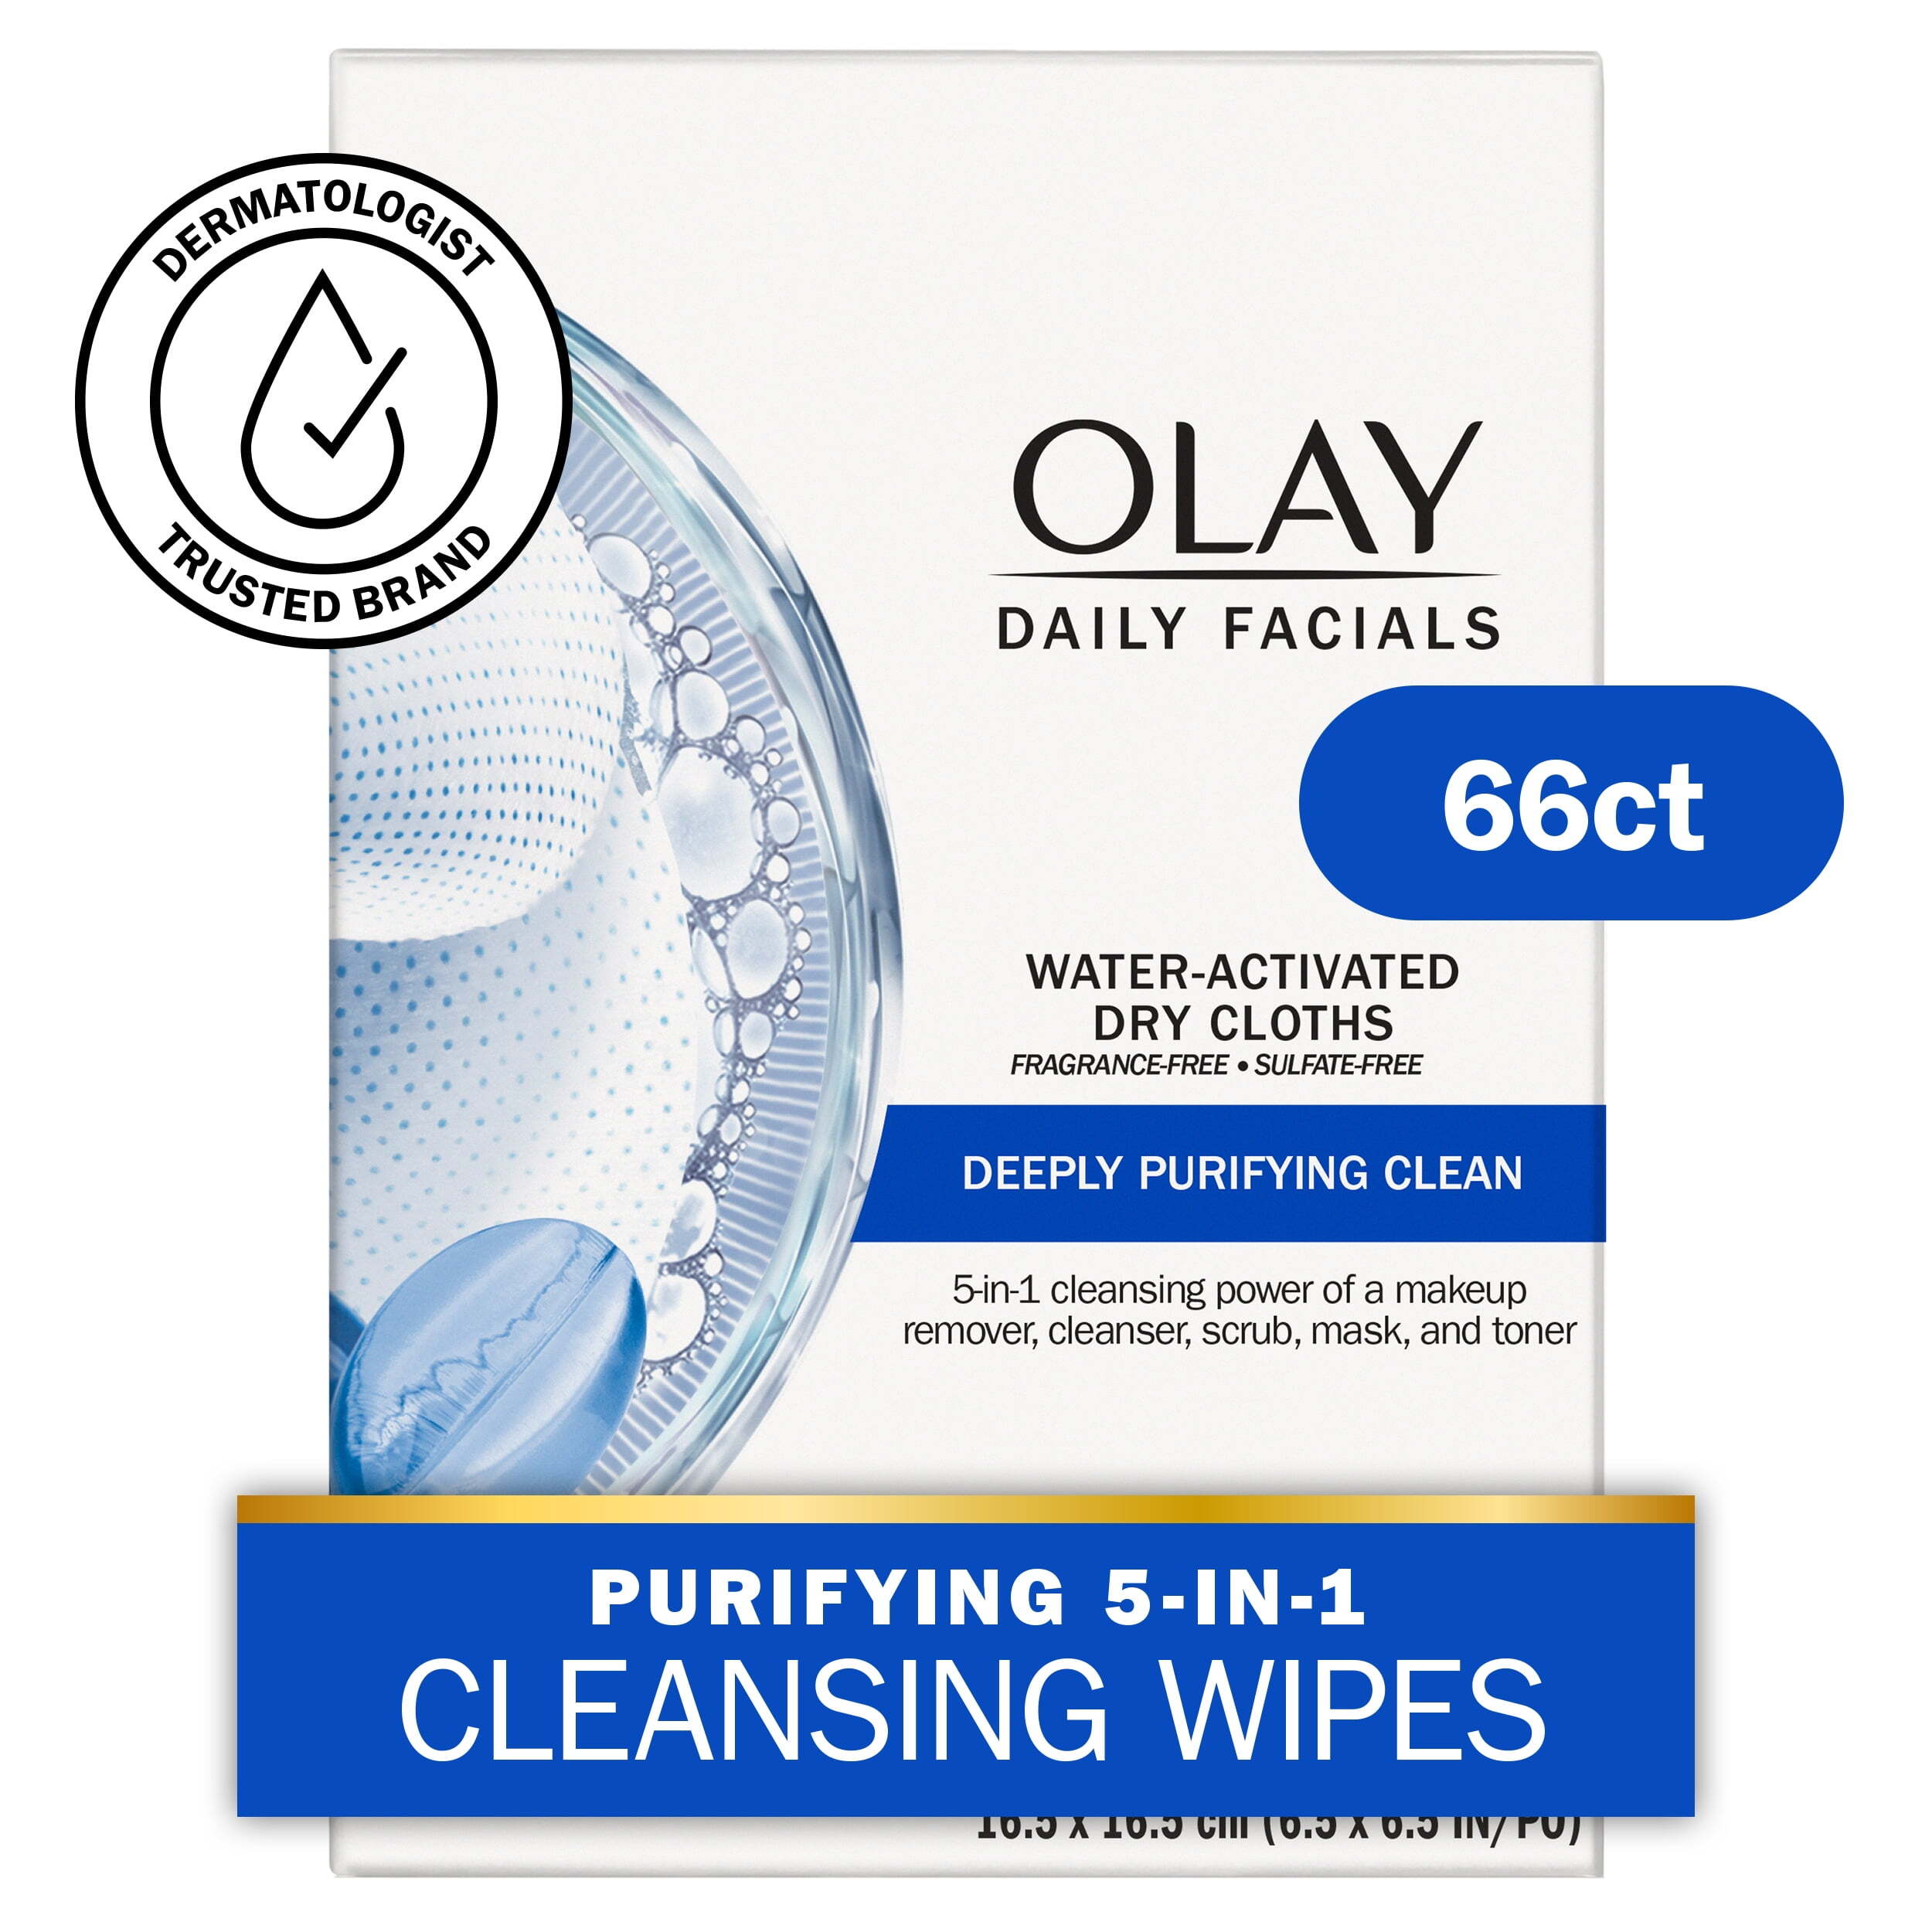 Olay Daily Skincare Deeply Purifying Cleansing Facial Wipes, Fragrance-Free, All Skin Types 66 Count - image 1 of 10